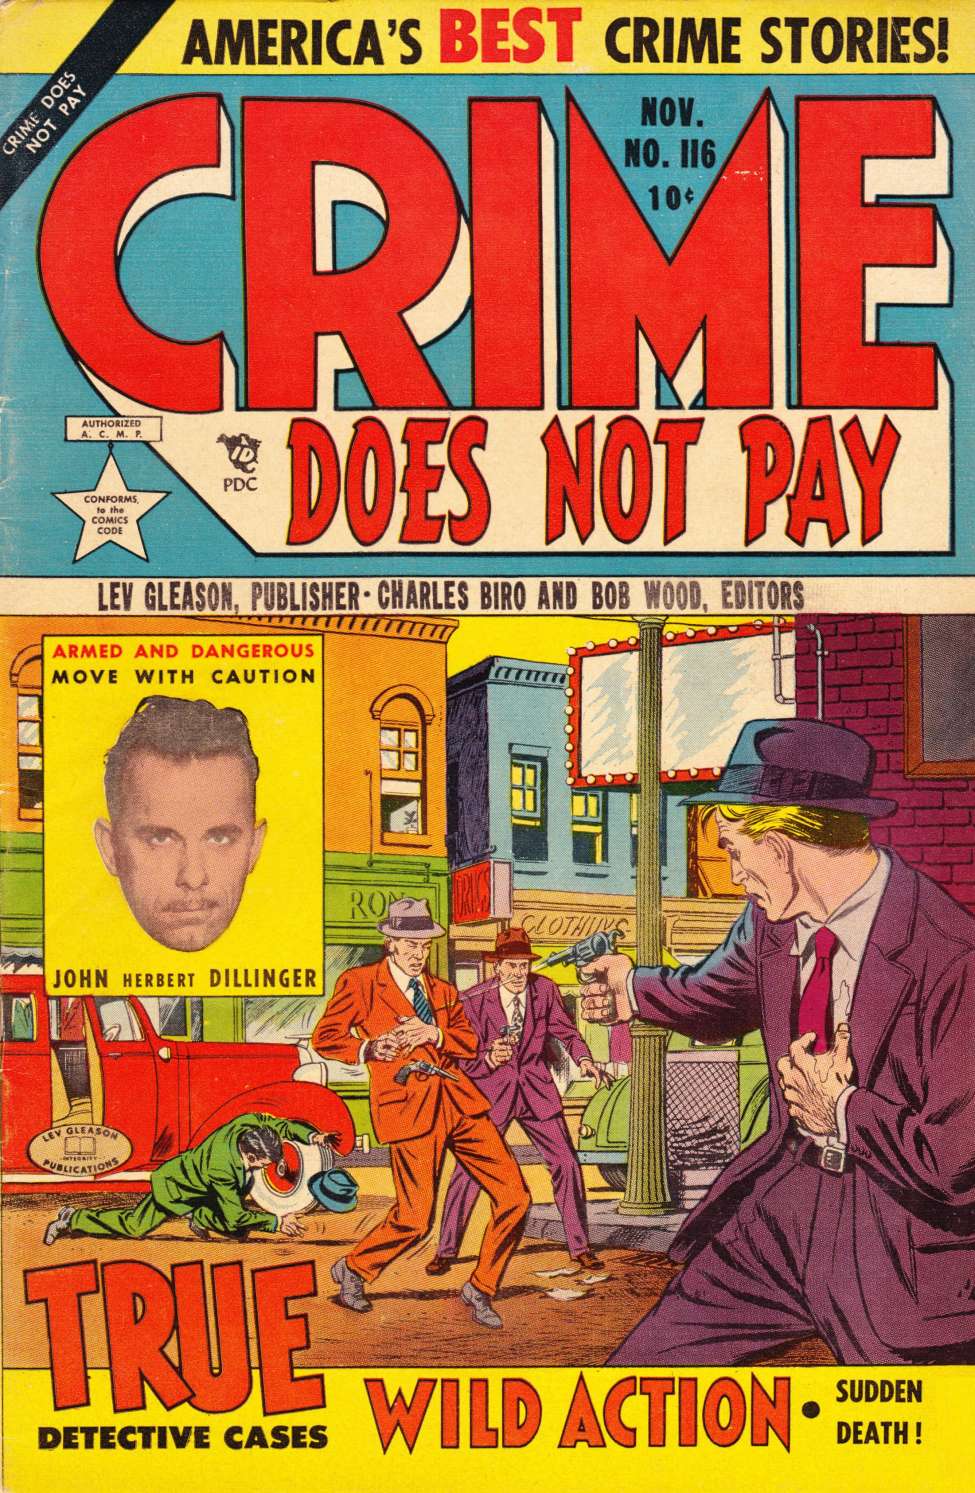 Book Cover For Crime Does Not Pay 116 - Version 2